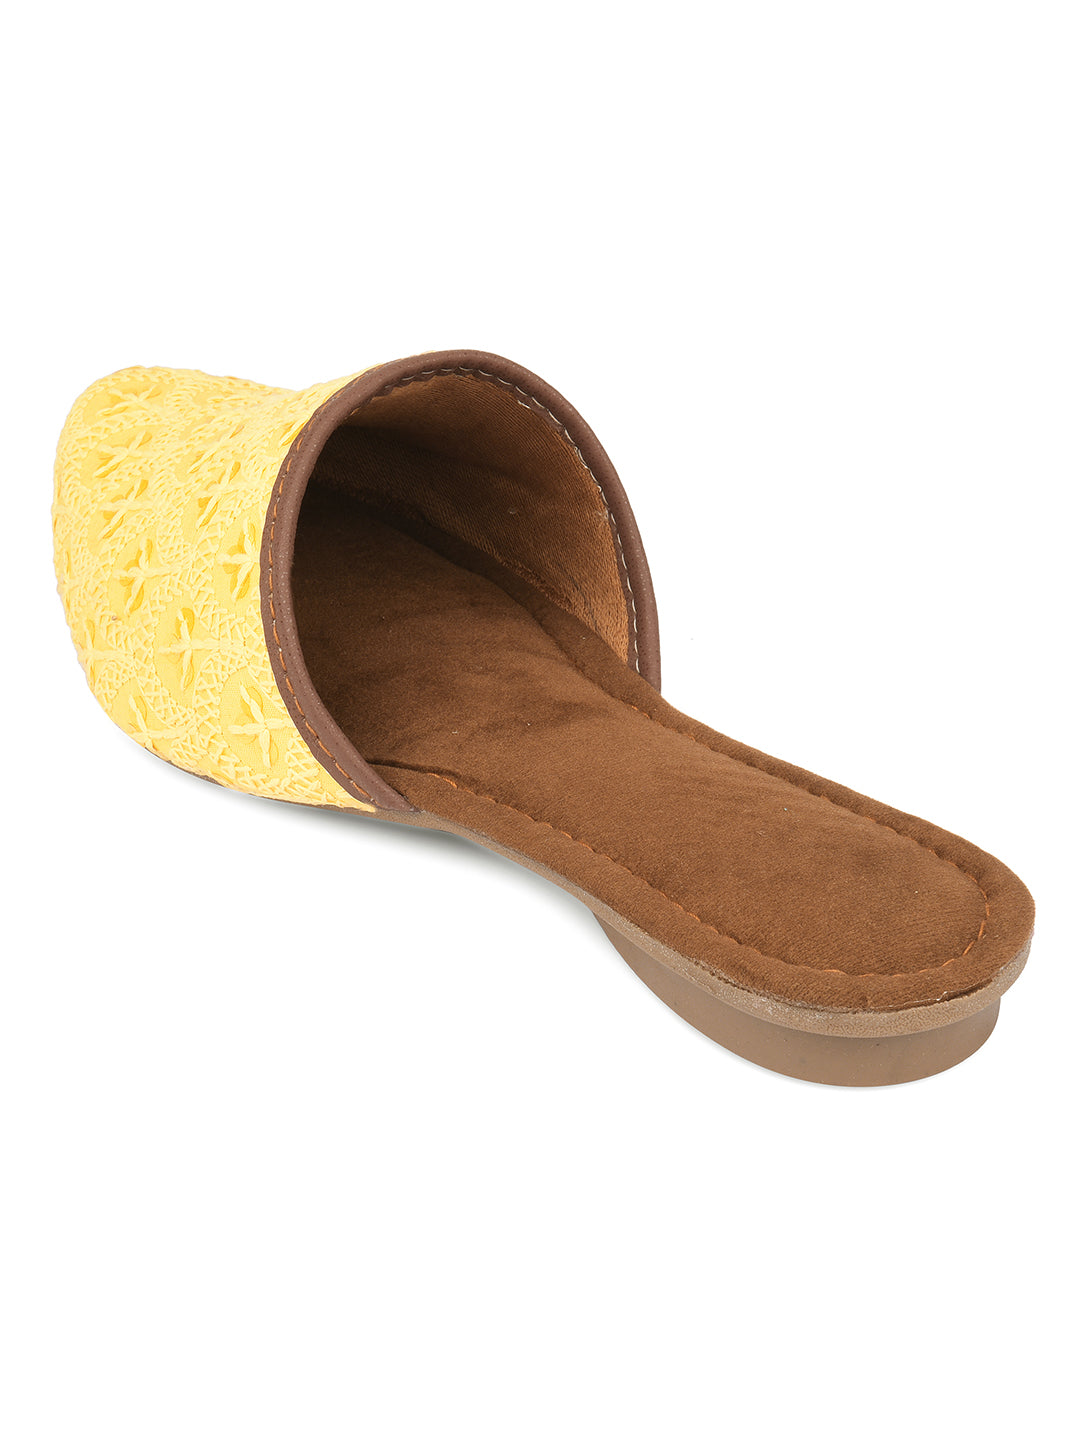 DESI COLOUR Women Yellow Embroidered Mules Flats